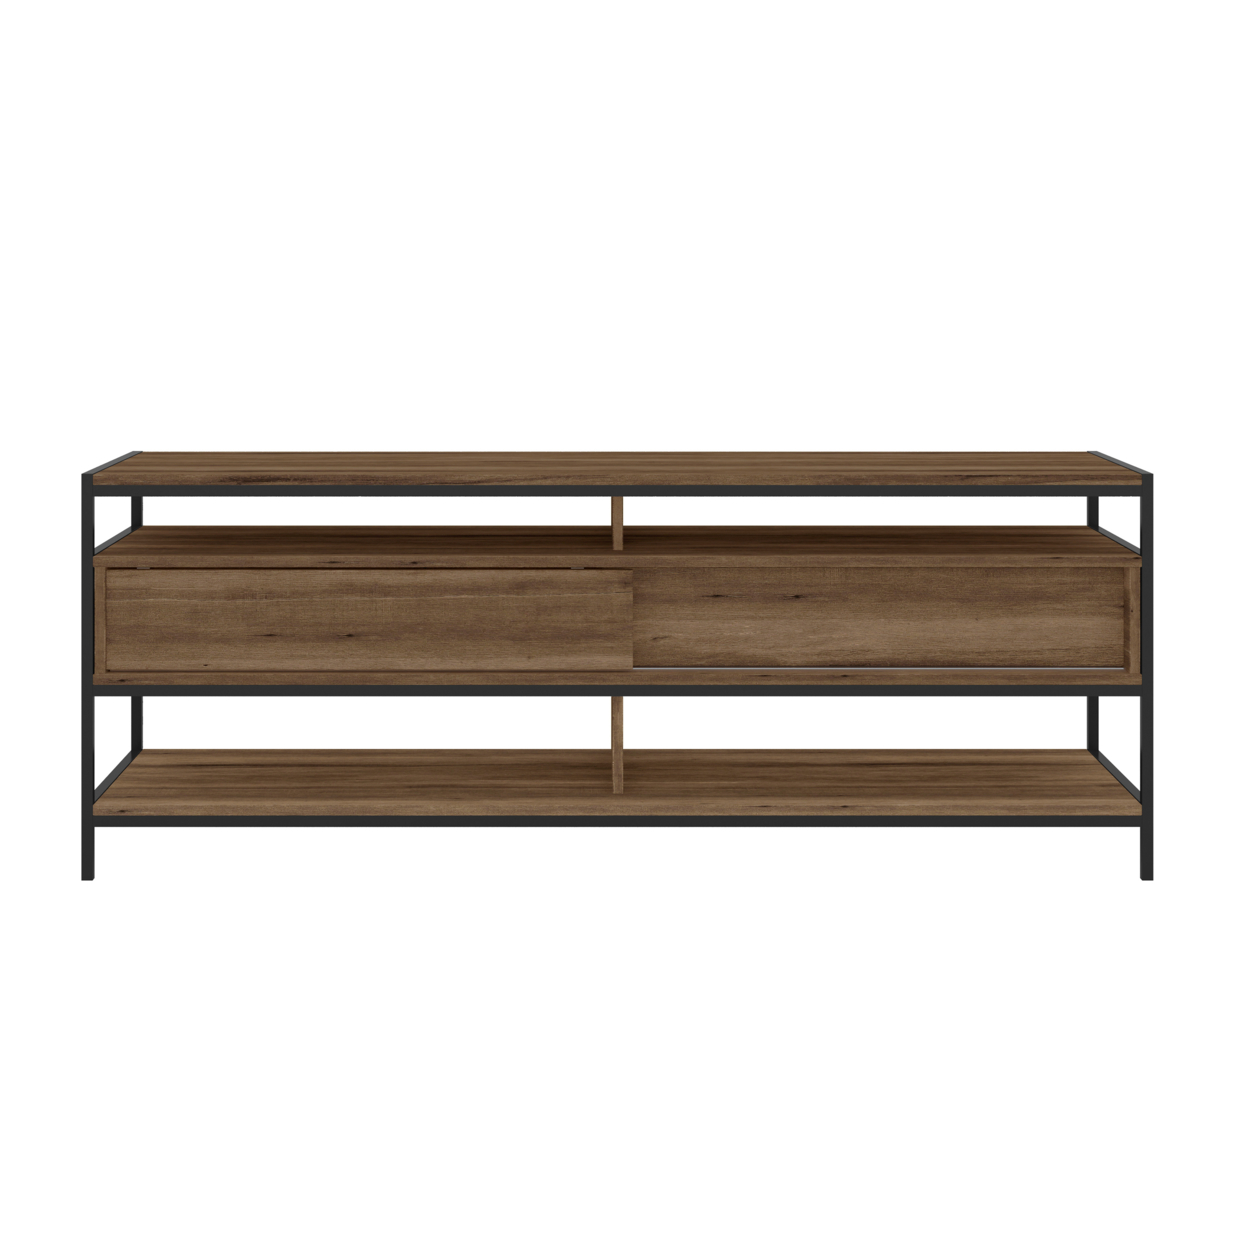 58 Inch Wood And Metal Entertainmnet TV Stand With 2 Drawers, Brown And Black- Saltoro Sherpi